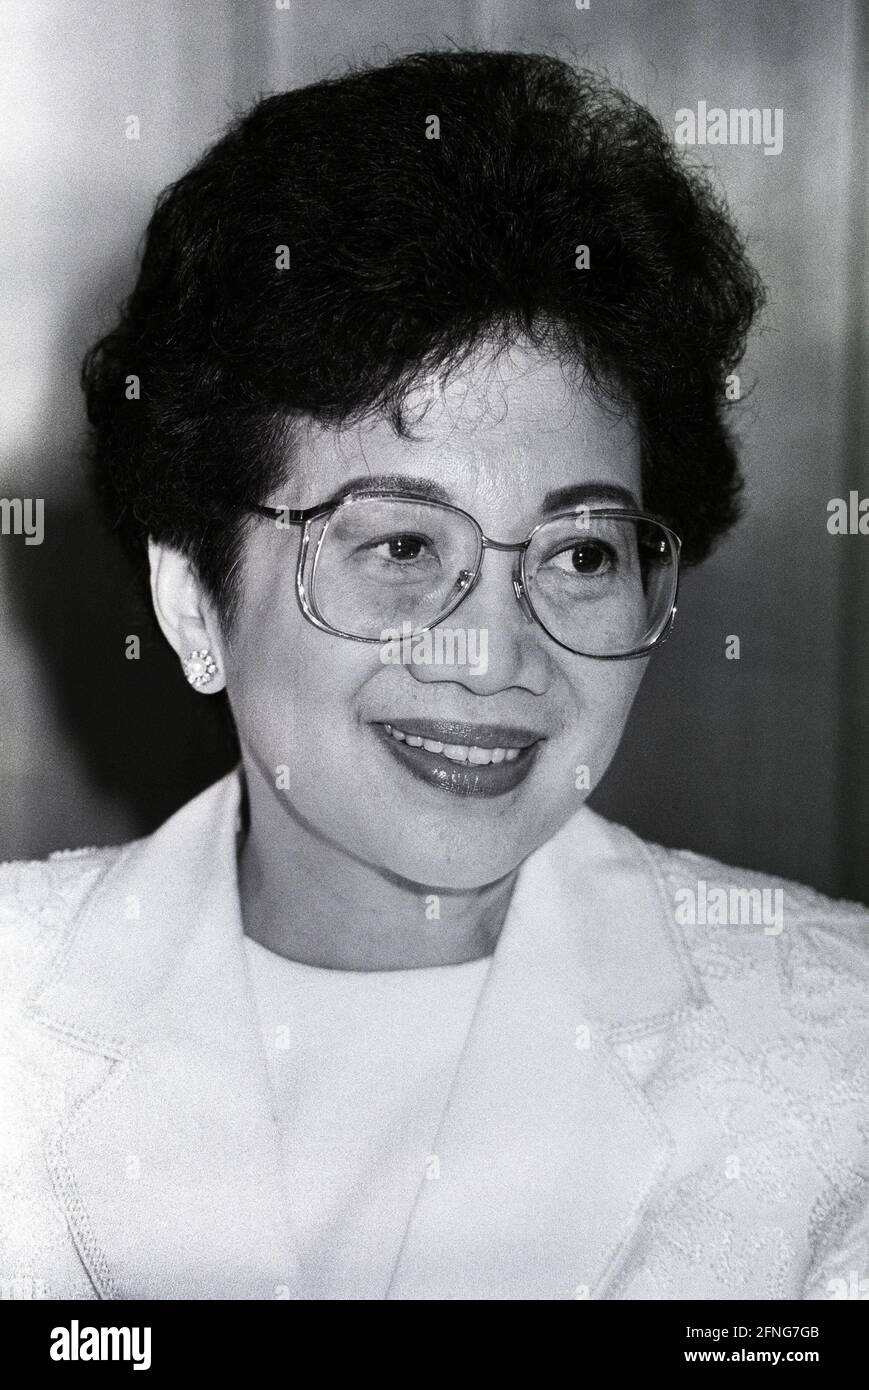 Germany, Bonn, 11.07.1989. Archive No: 07-13-09 State visit of the President of the Philippines Photo: President Corazon Aquino [automated translation] Stock Photo